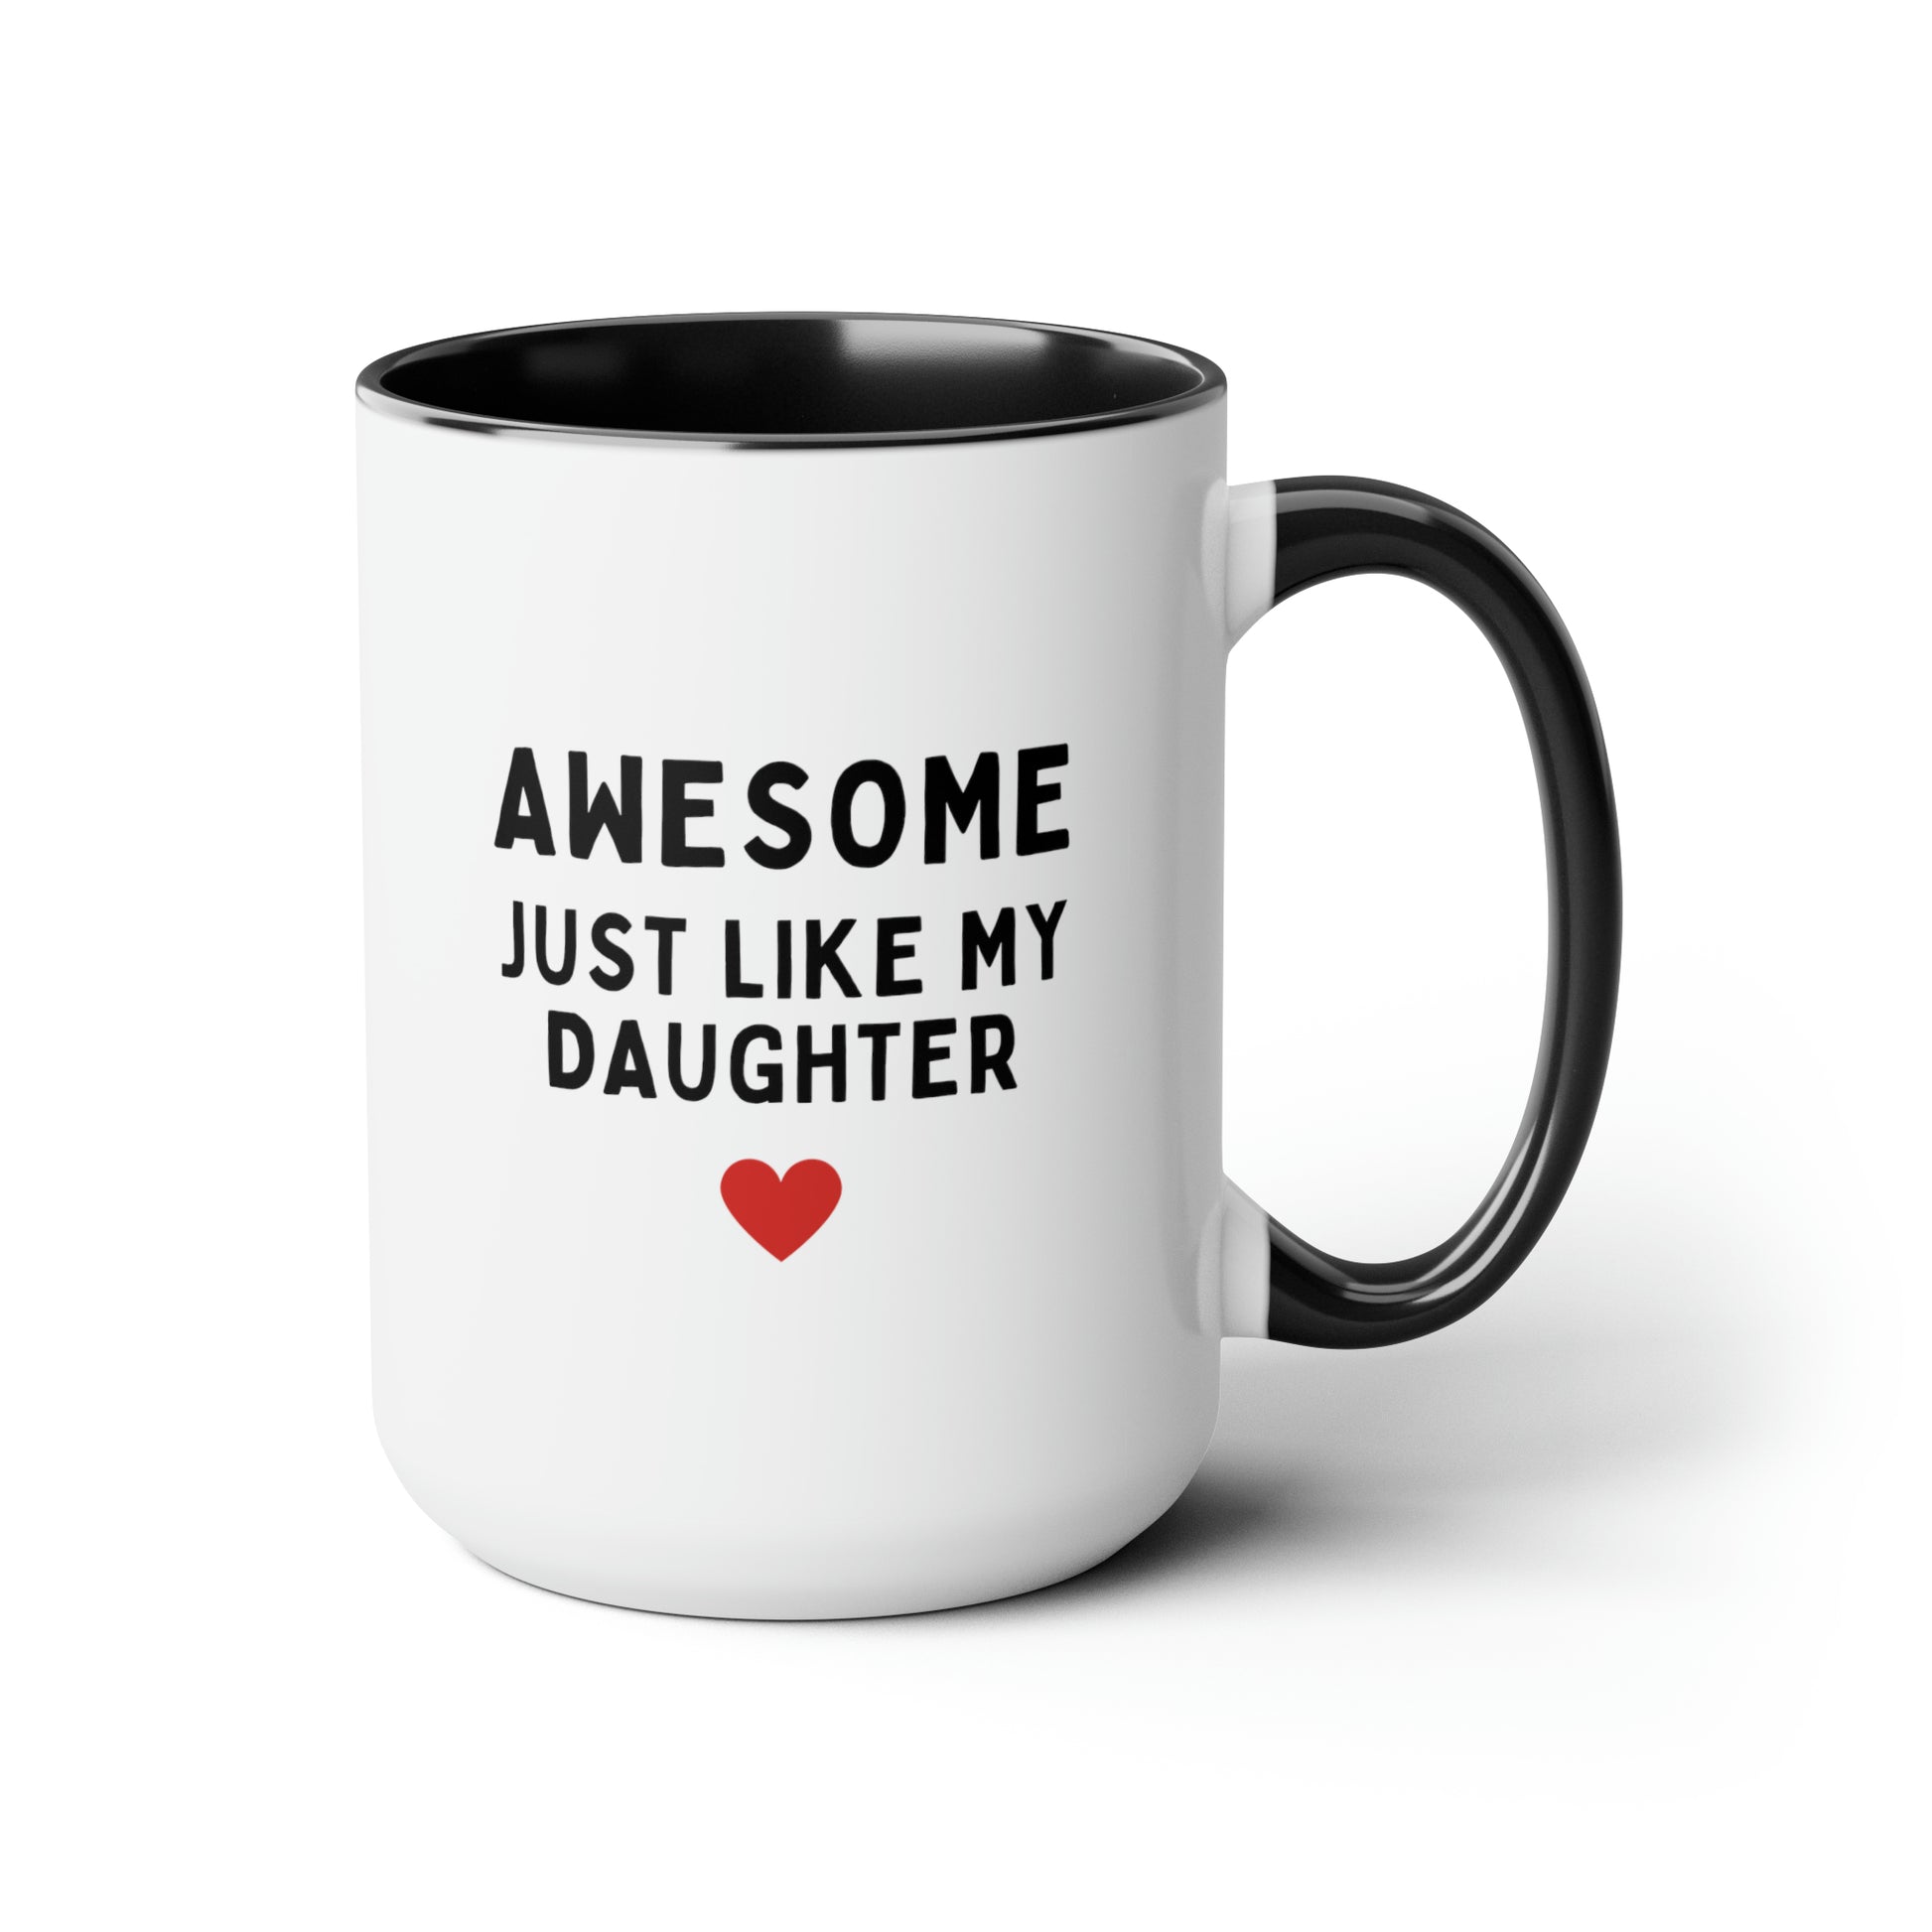 Awesome Just Like My Daughter 15oz white with black accent funny large coffee mug gift for husband daughter to dad fathers day cup waveywares wavey wares wavywares wavy wares